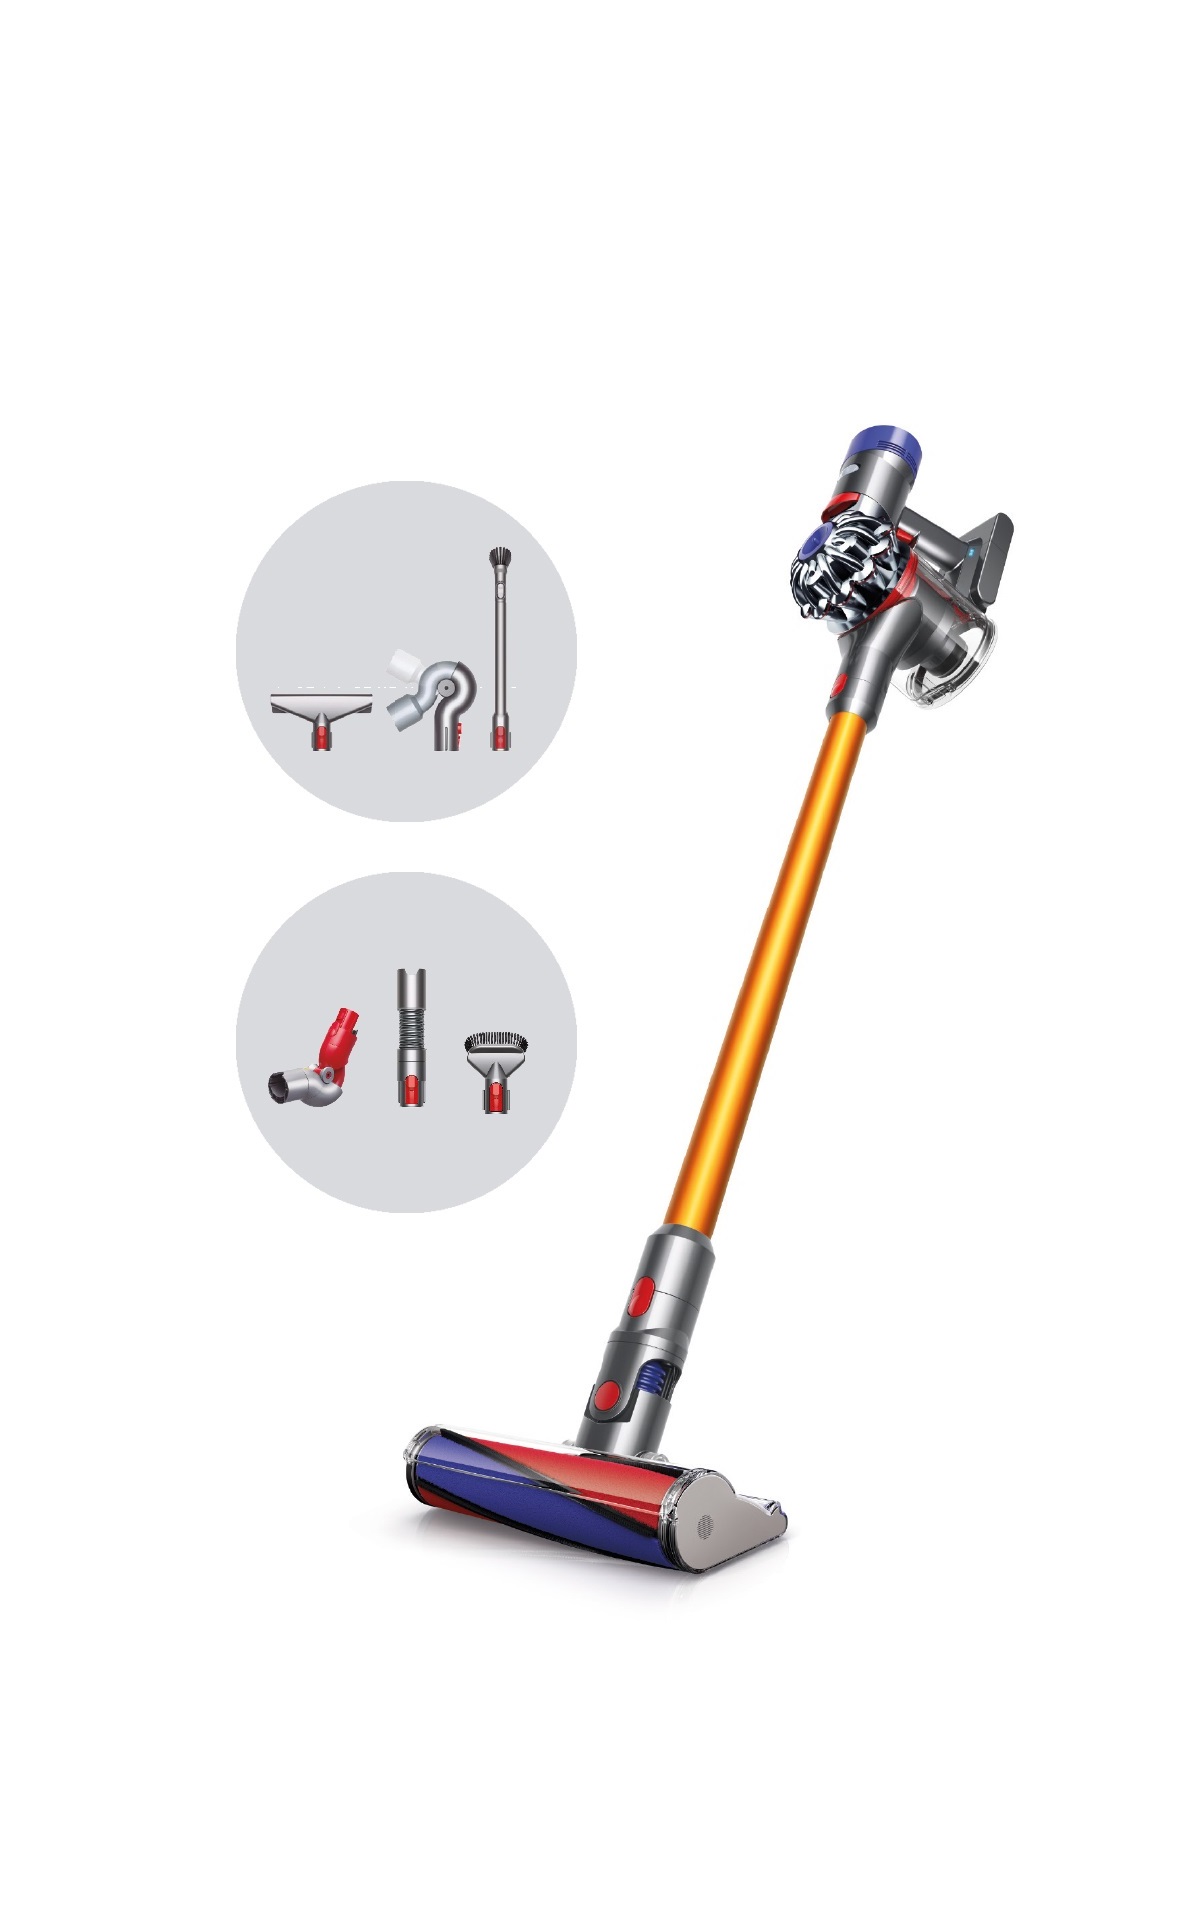 V8 Absolute Dyson Vacuum Cleaner